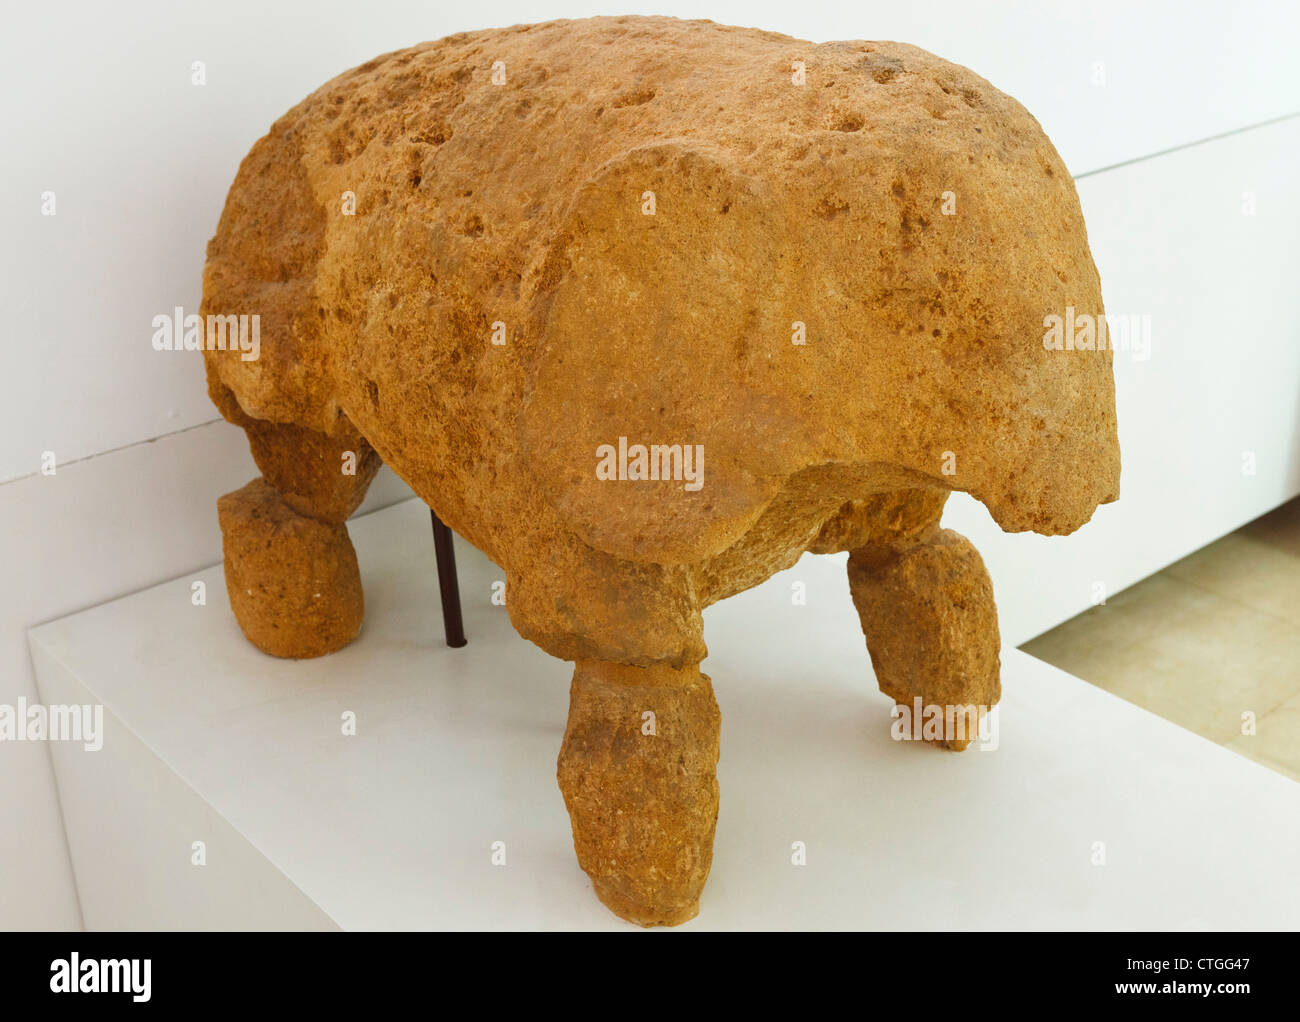 The Archaeological Complex, Carmona, Seville Province, Spain. Sculpture in the museum of an elephant... Stock Photo